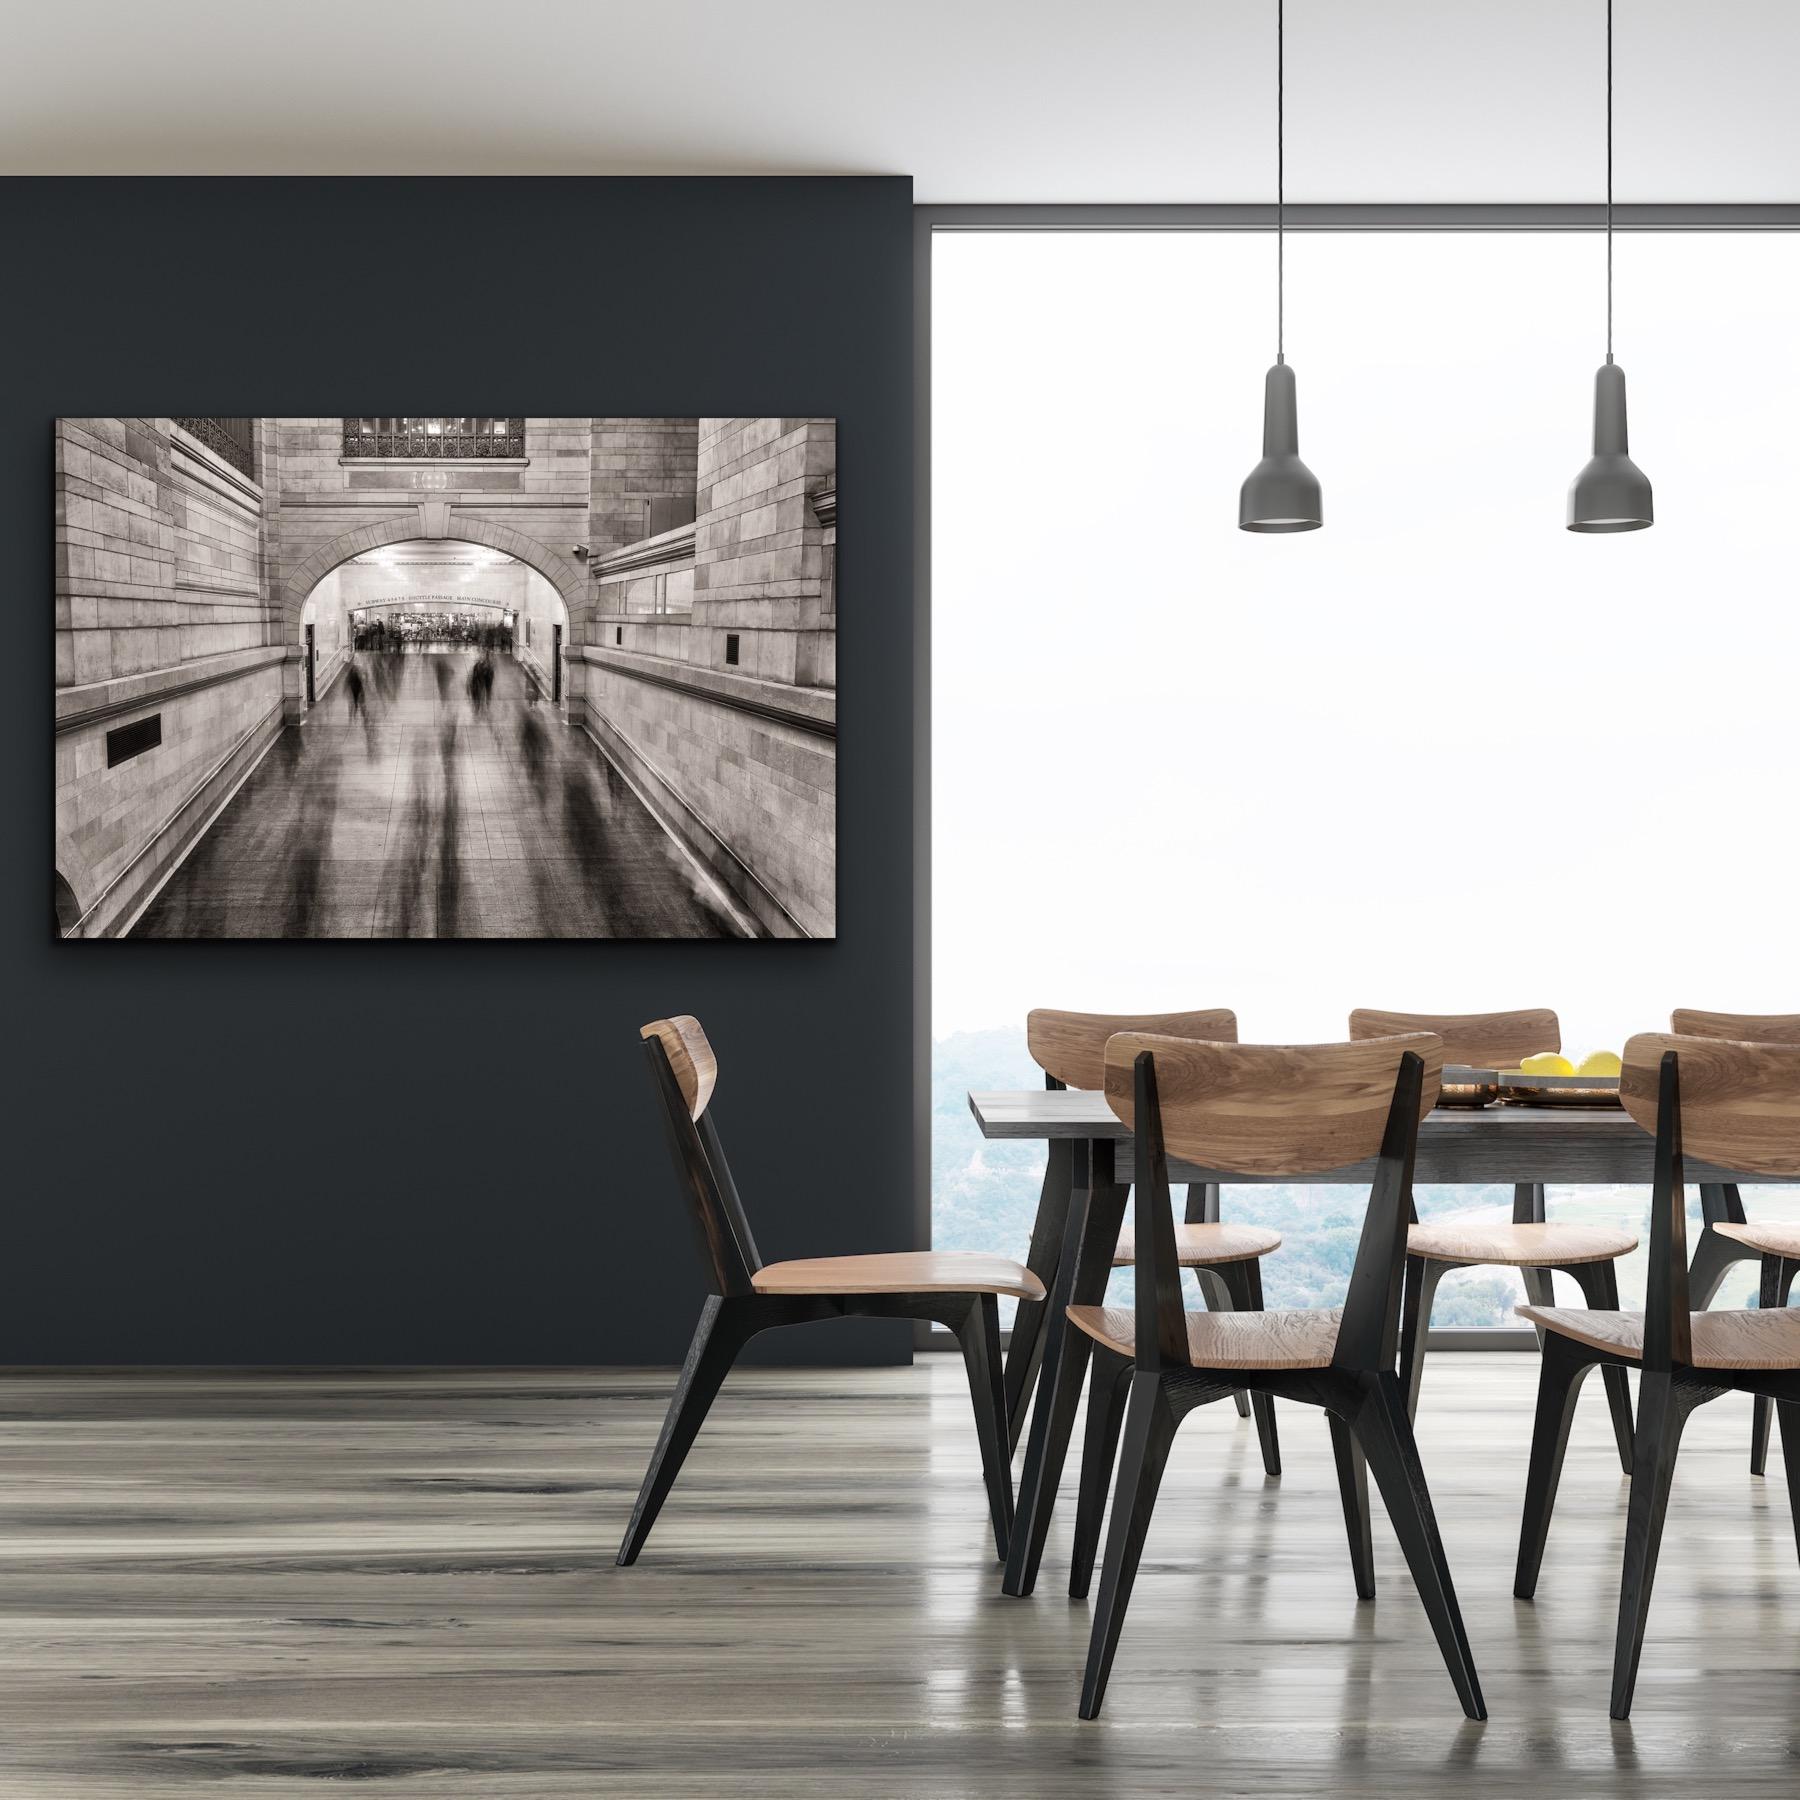 This black and white, urban architectural photograph by Peter Mendelson was taken in Grand Central Station in Manhattan. The artist has captured the still, stately nature of this landmark building, while the moving commuters, tourists, and city